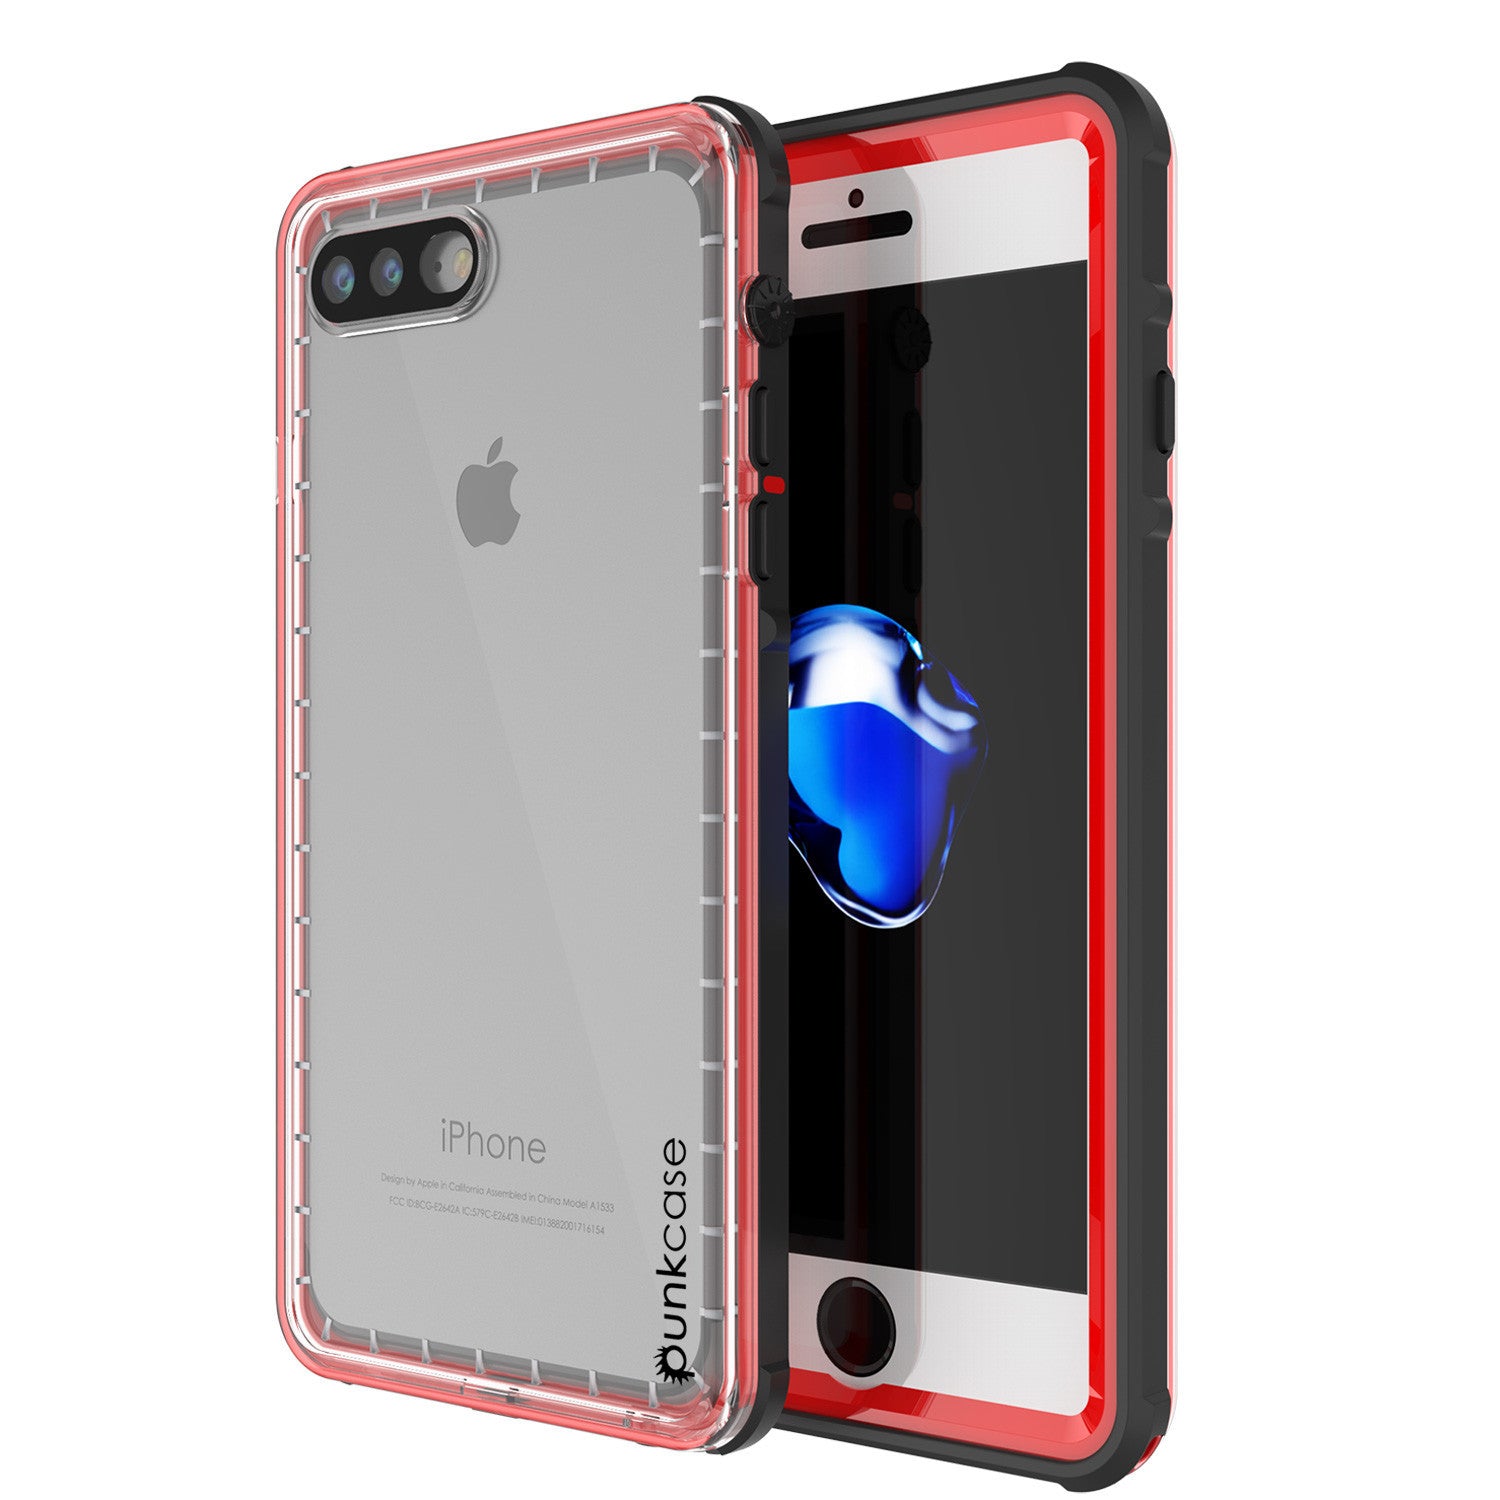 iPhone 7+ Plus Waterproof Case, PUNKcase CRYSTAL Red W/ Attached Screen Protector | Warranty